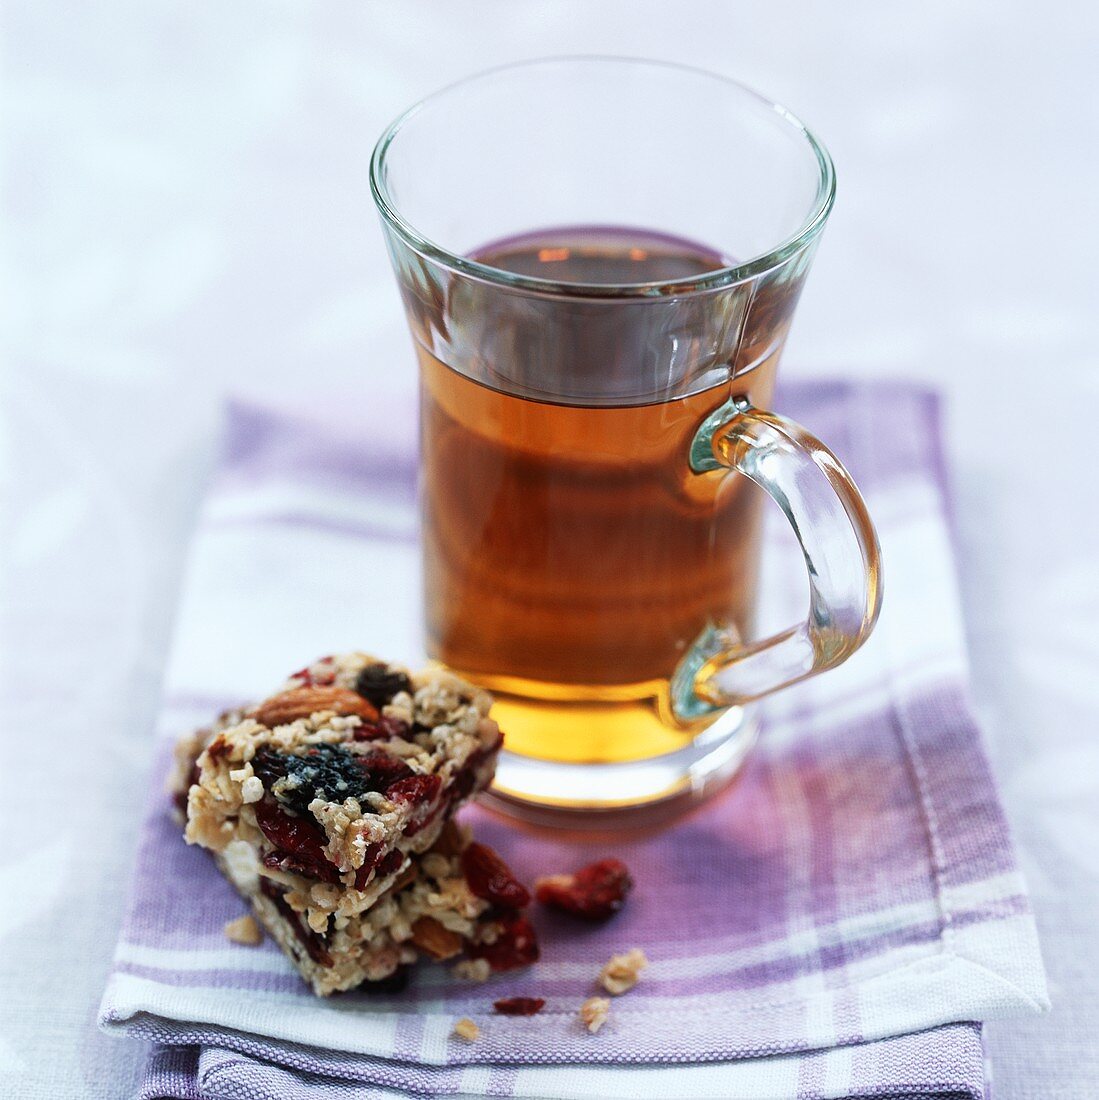 A glass of herbal tea with a muesli bar